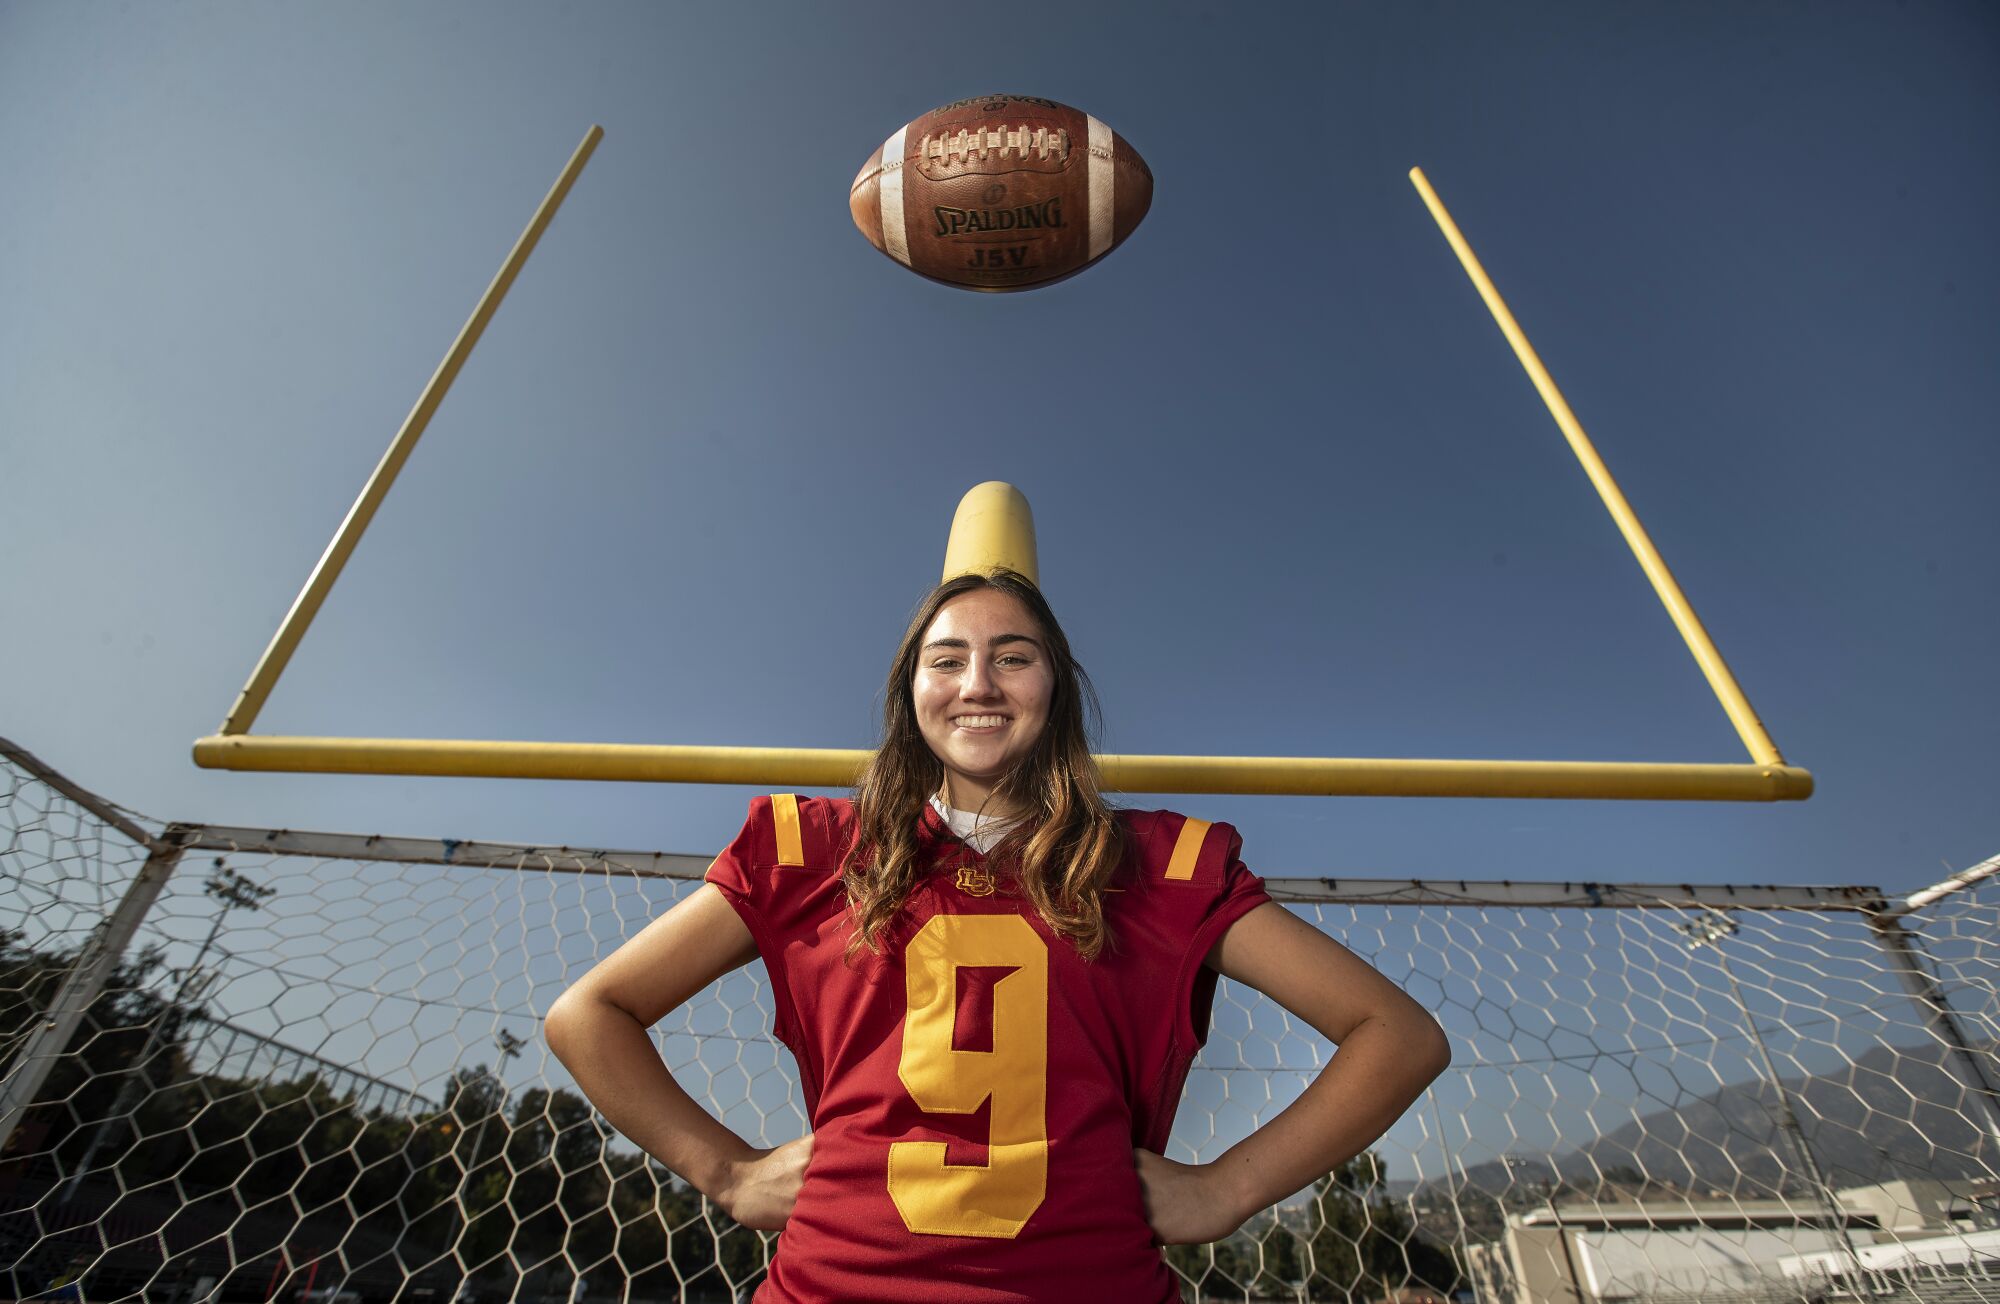 Shaina Clorfeine poses for a photo in the end zone of the La Canada practice field.